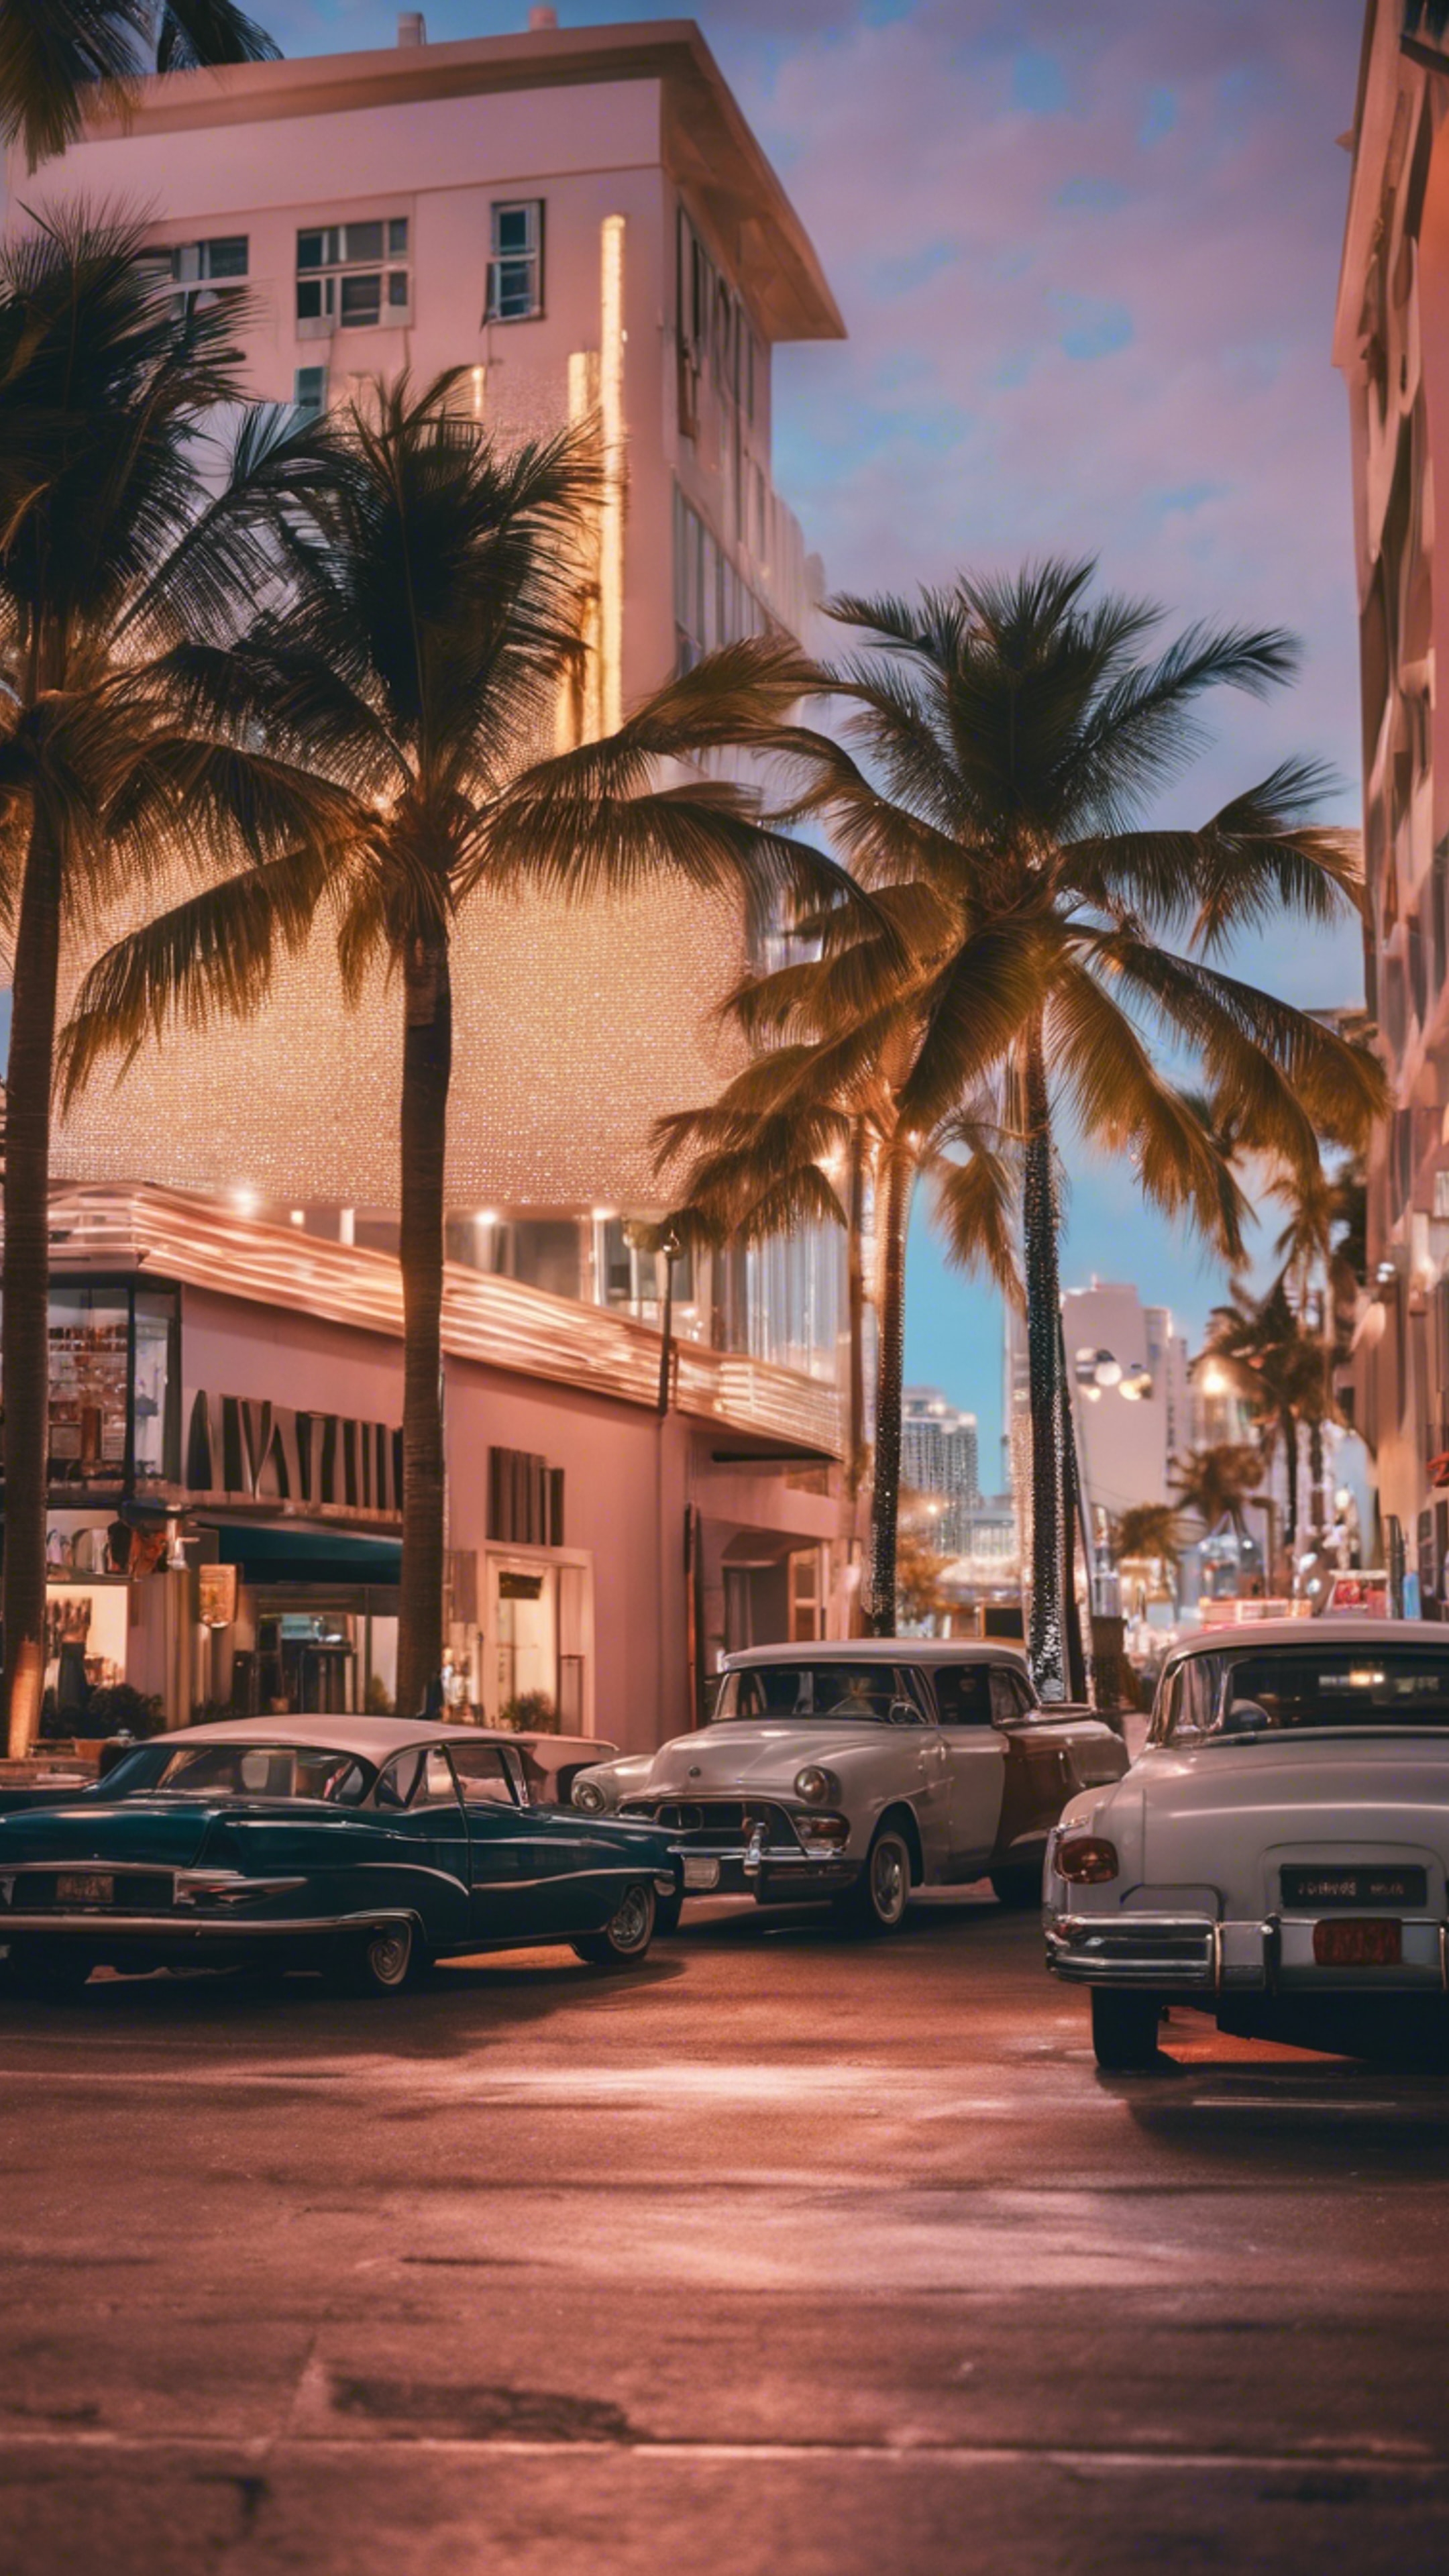 A bustling Miami Beach street scene, with art deco buildings and palm trees, vibrant nightlife atmosphere. 墙纸[c899e7f744884bb387cd]